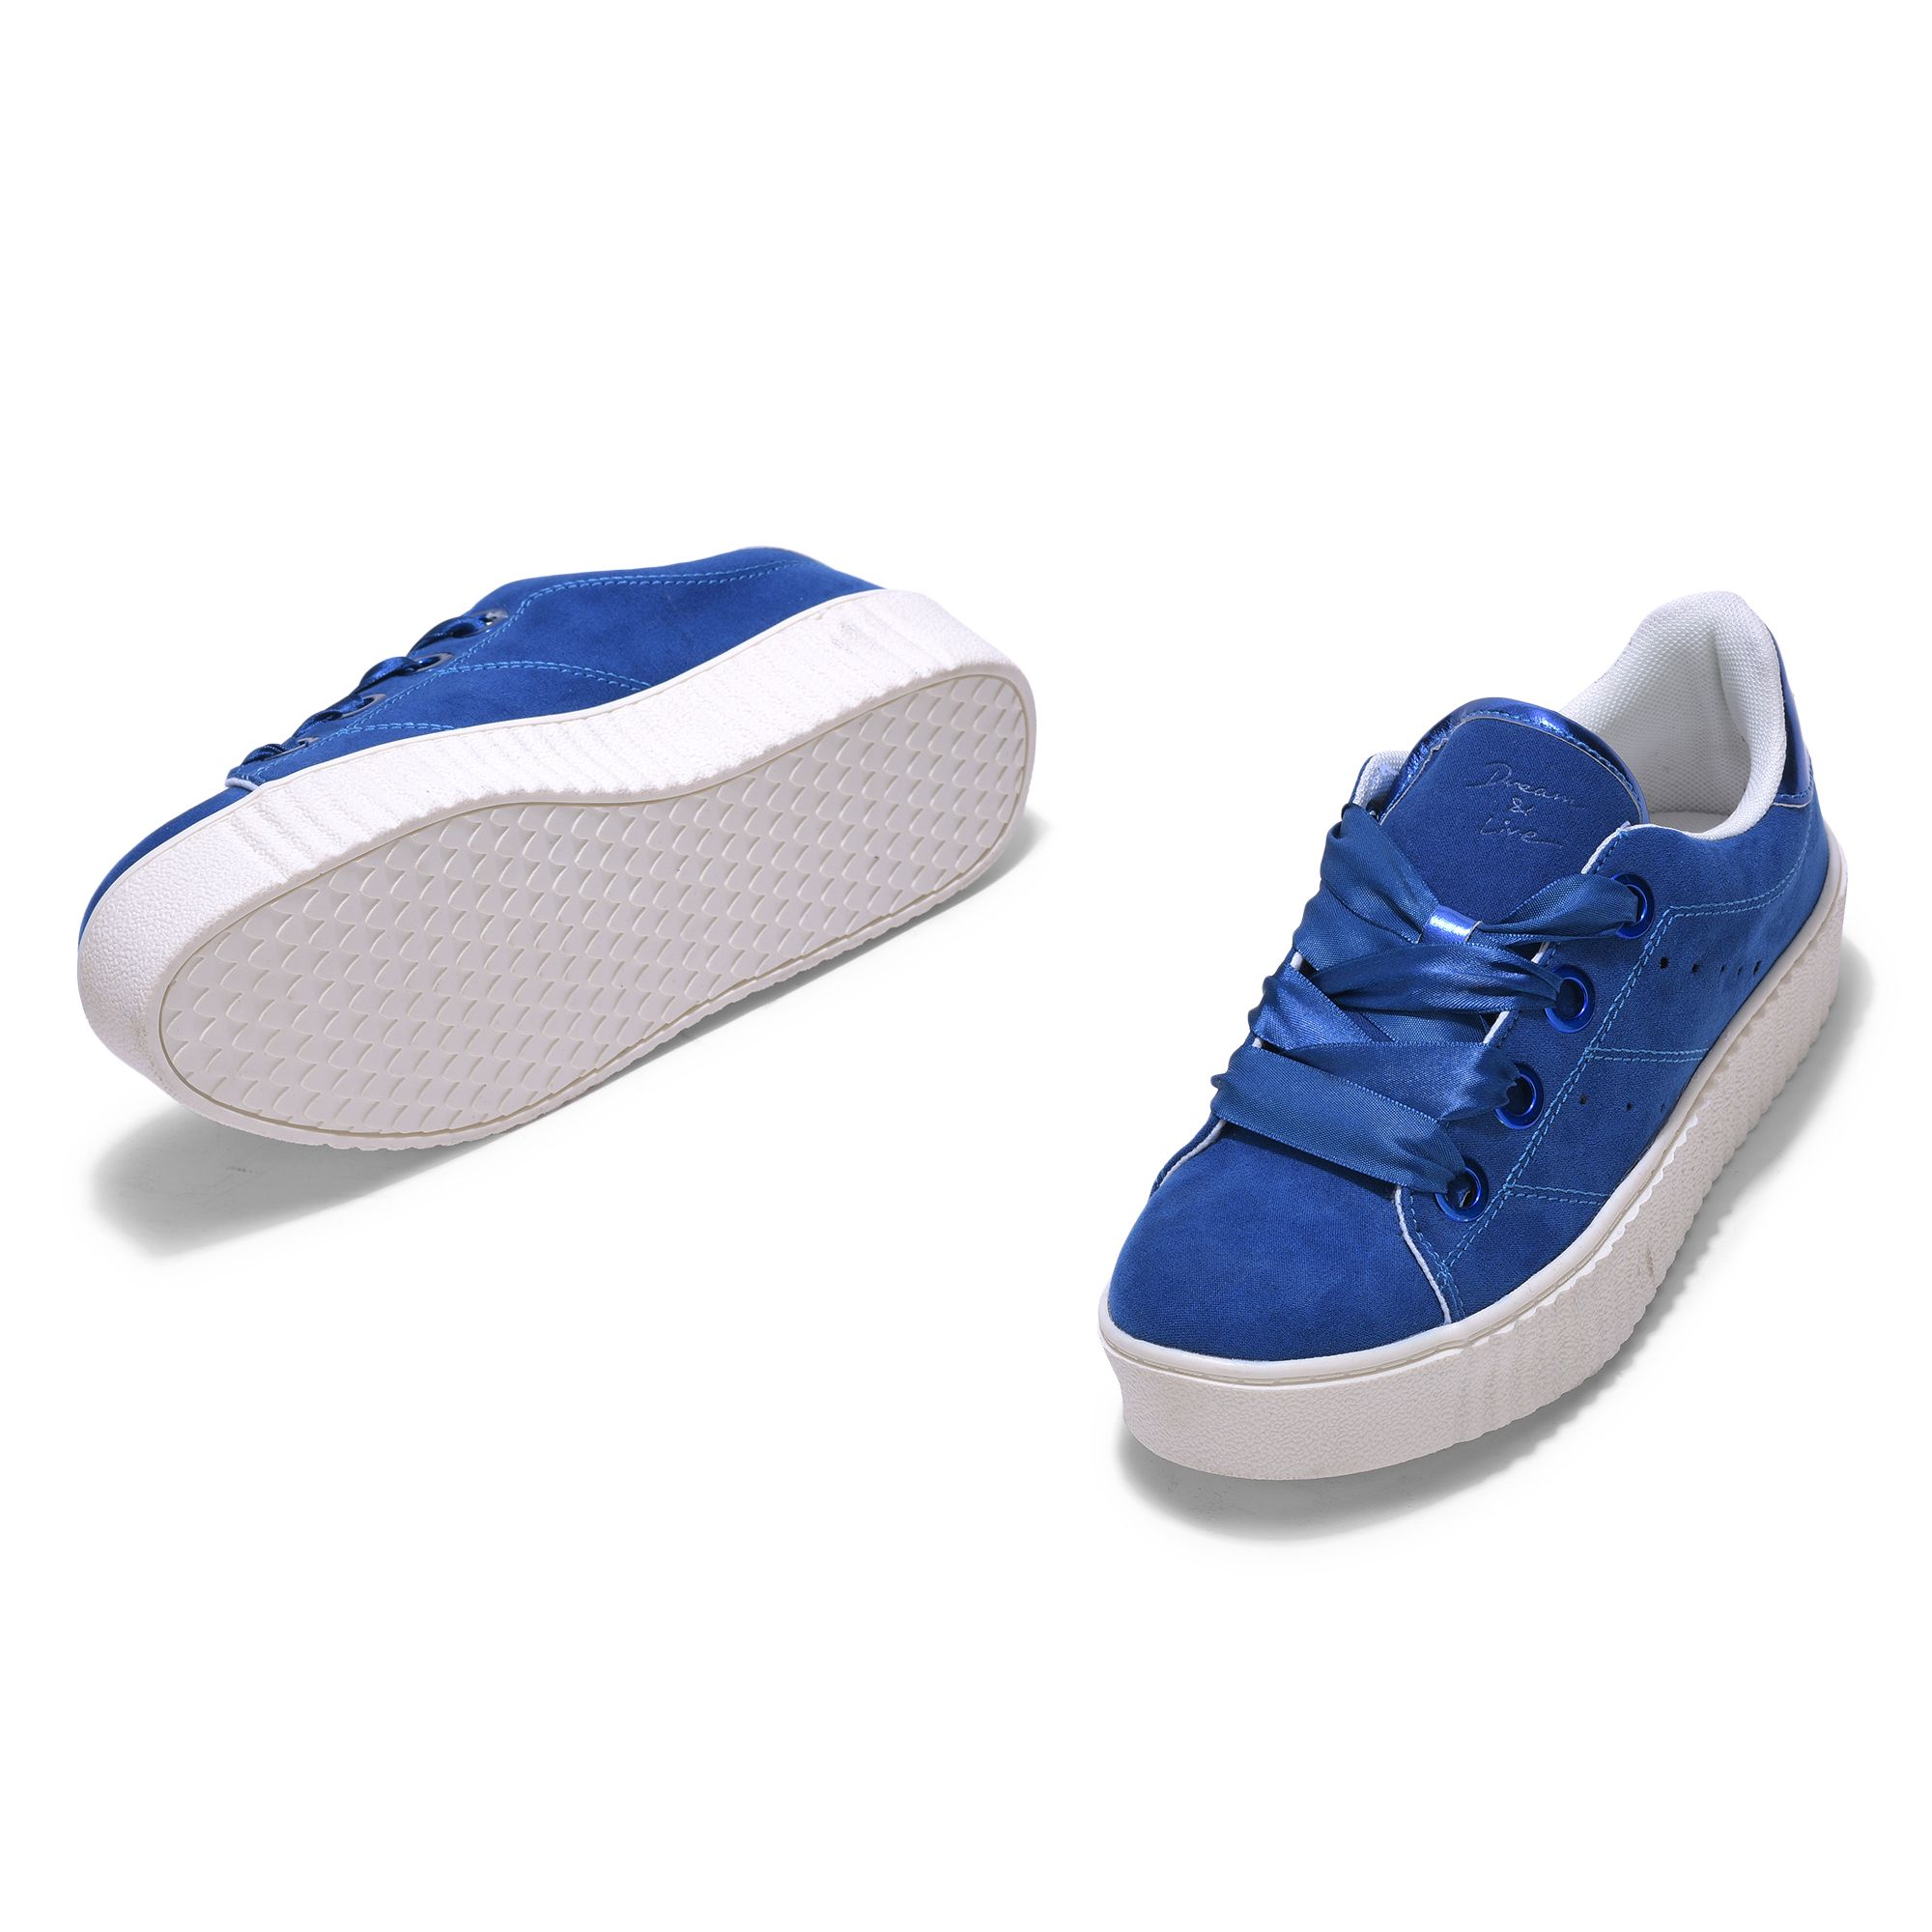 Blue casual sneakers